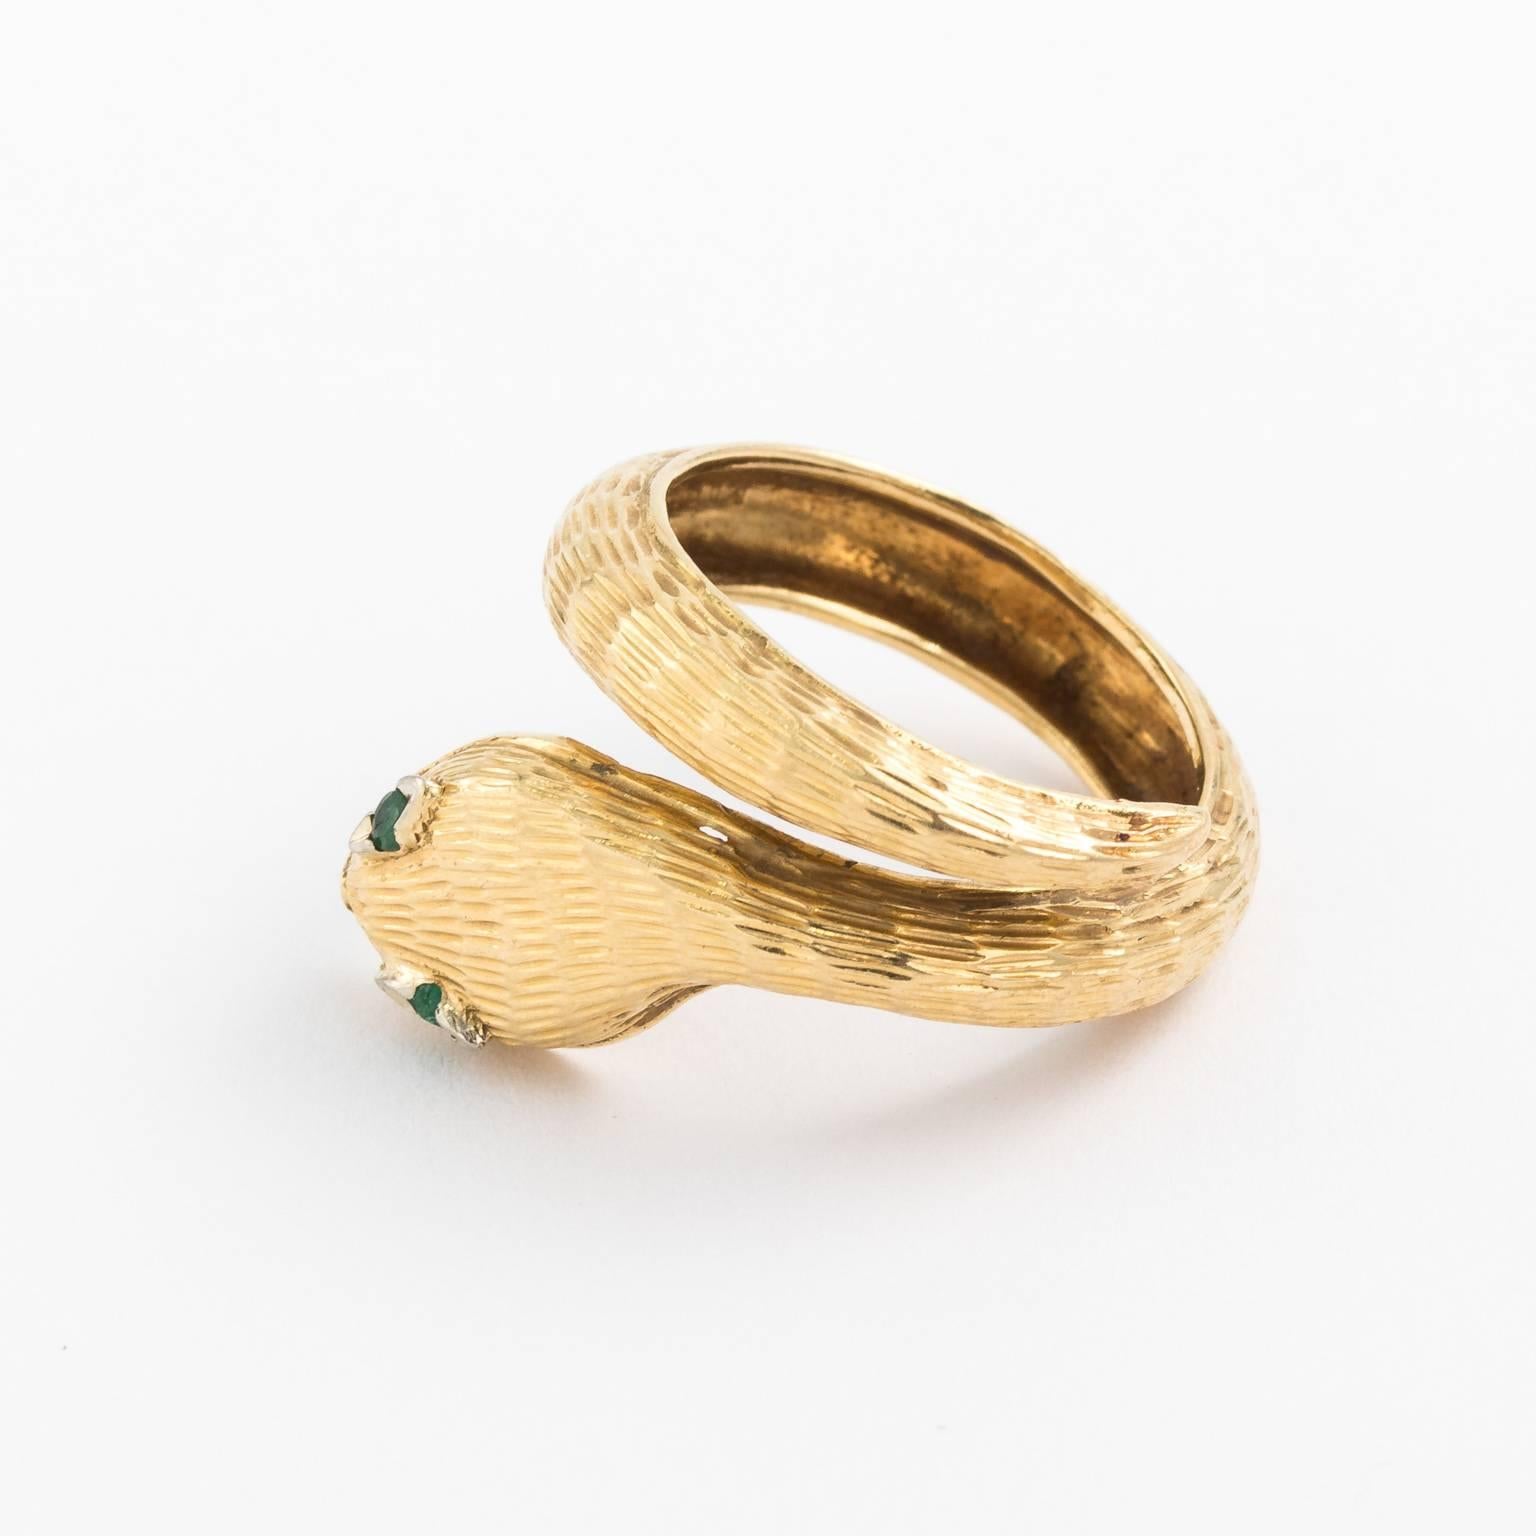 Contemporary Midcentury Snake Ring